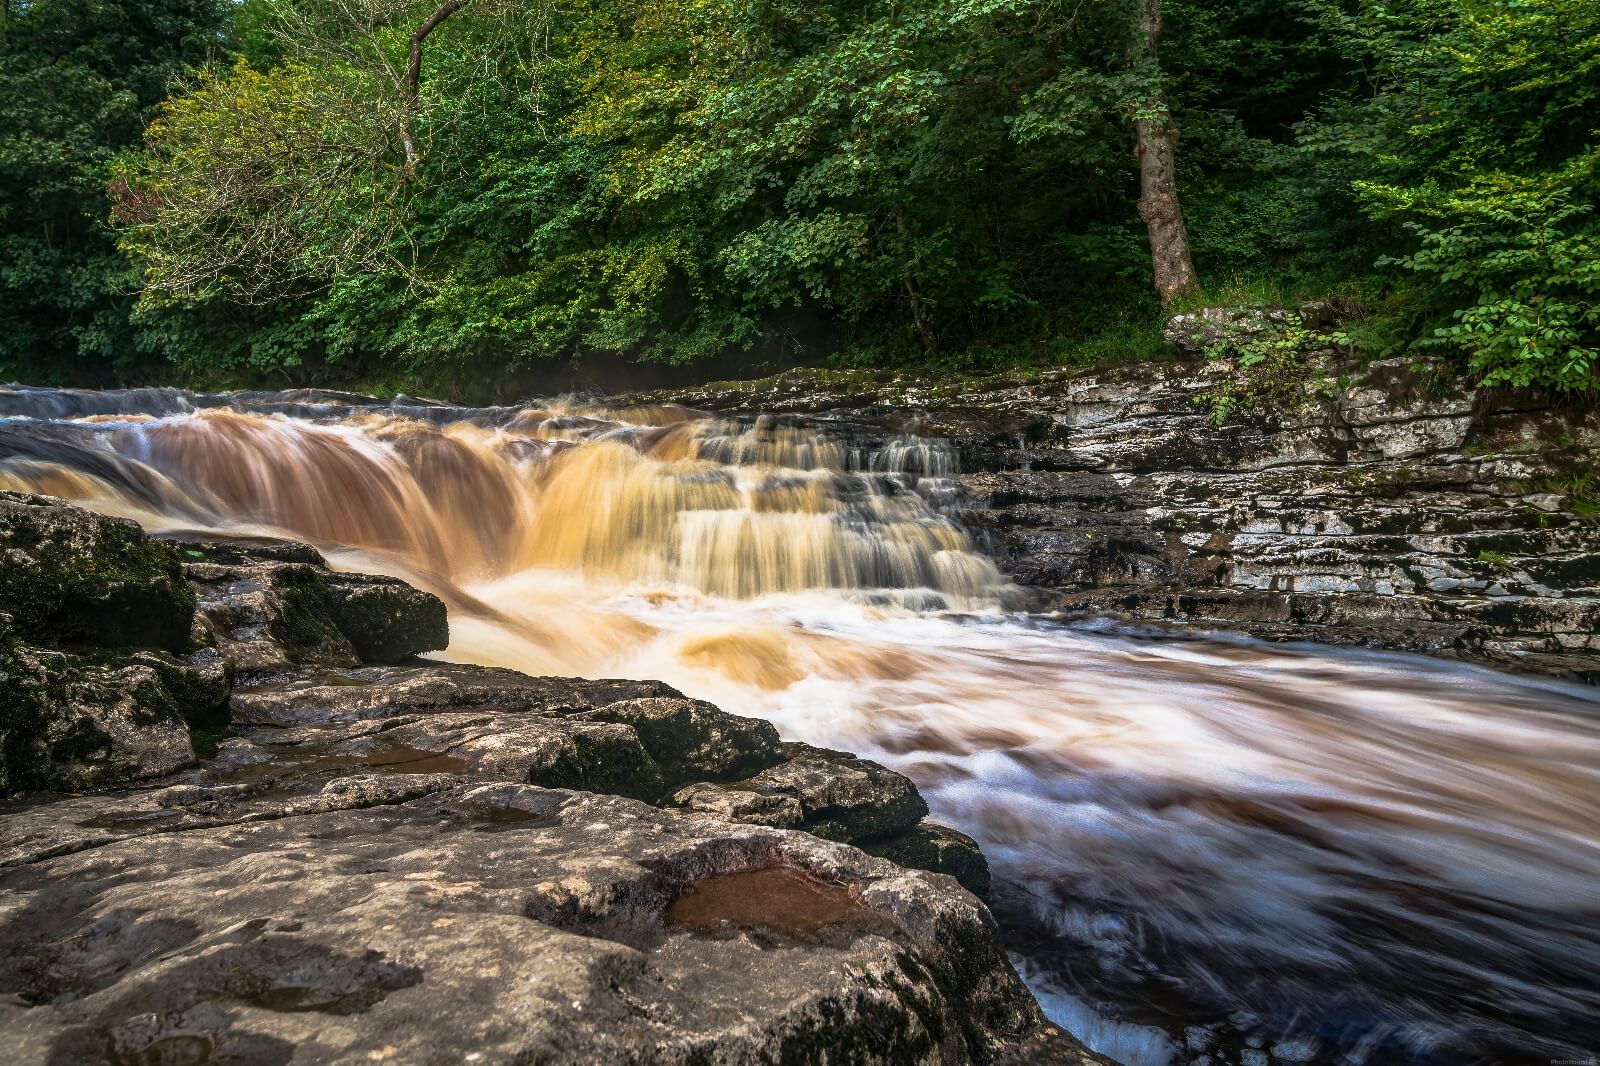 Image of Stainforth Force, Ribblesdale by Steven Godwin